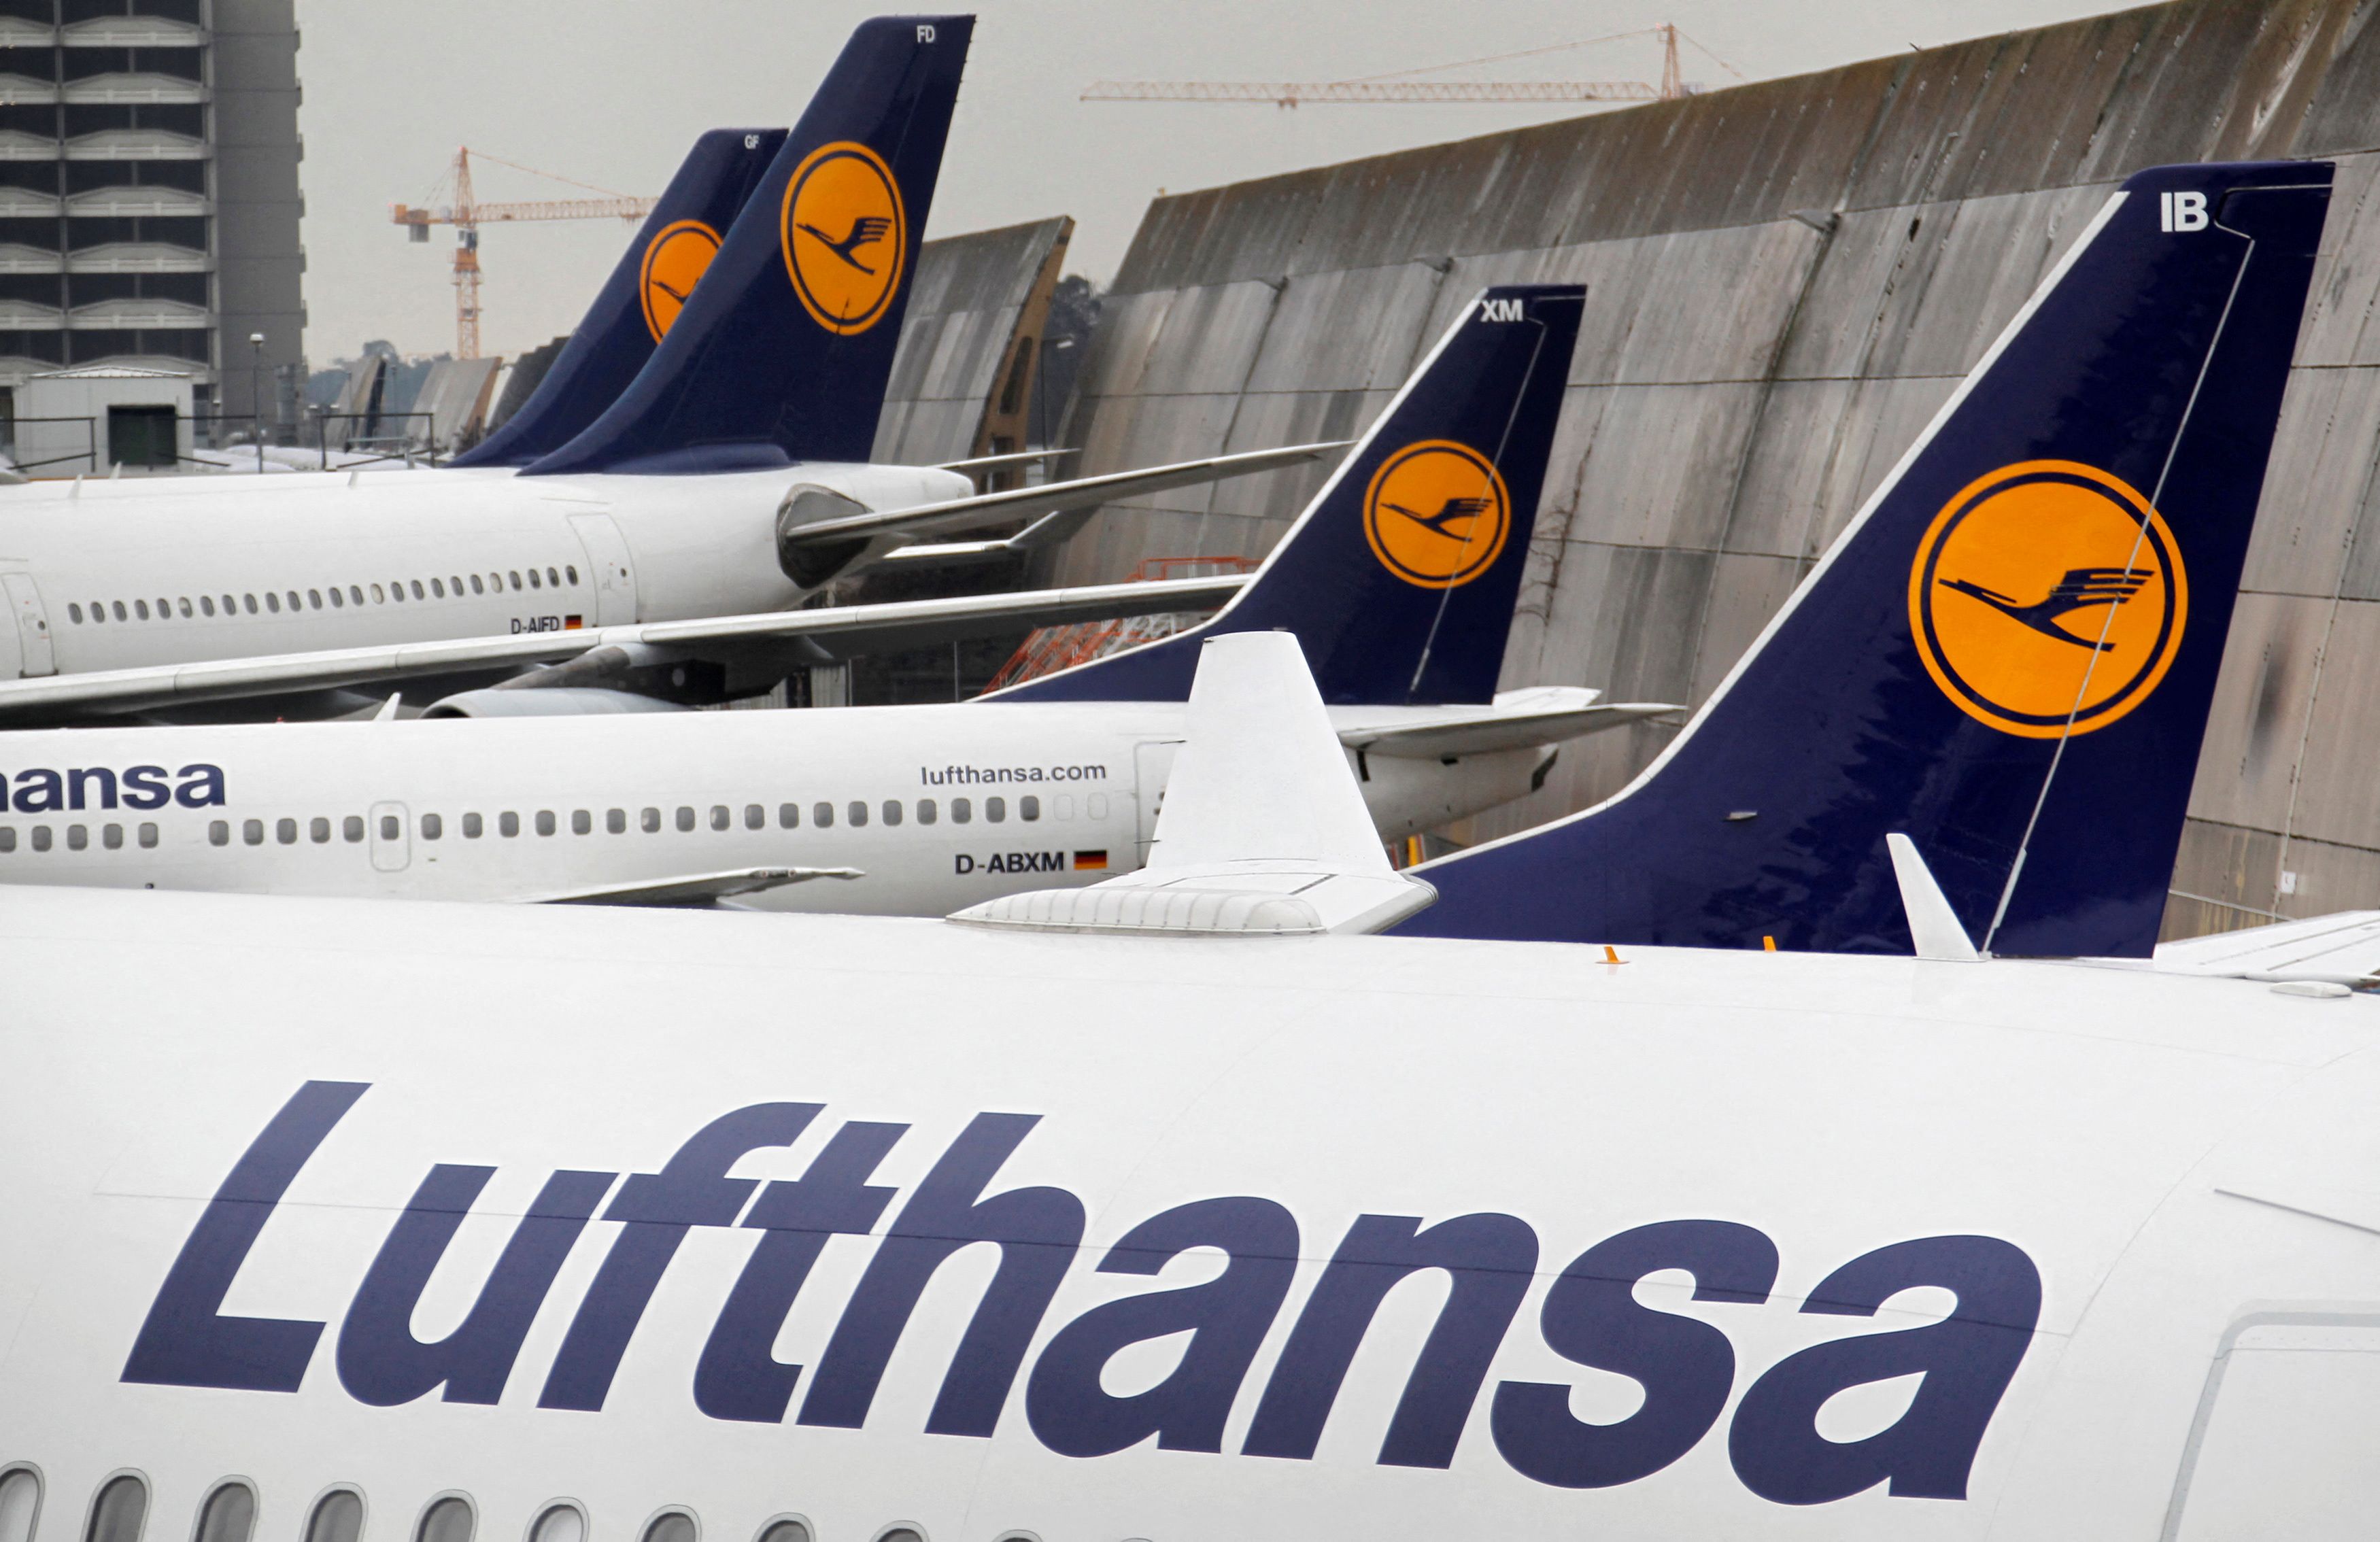 Lufthansa planes are pictured at Frankfurt Airport, Germany